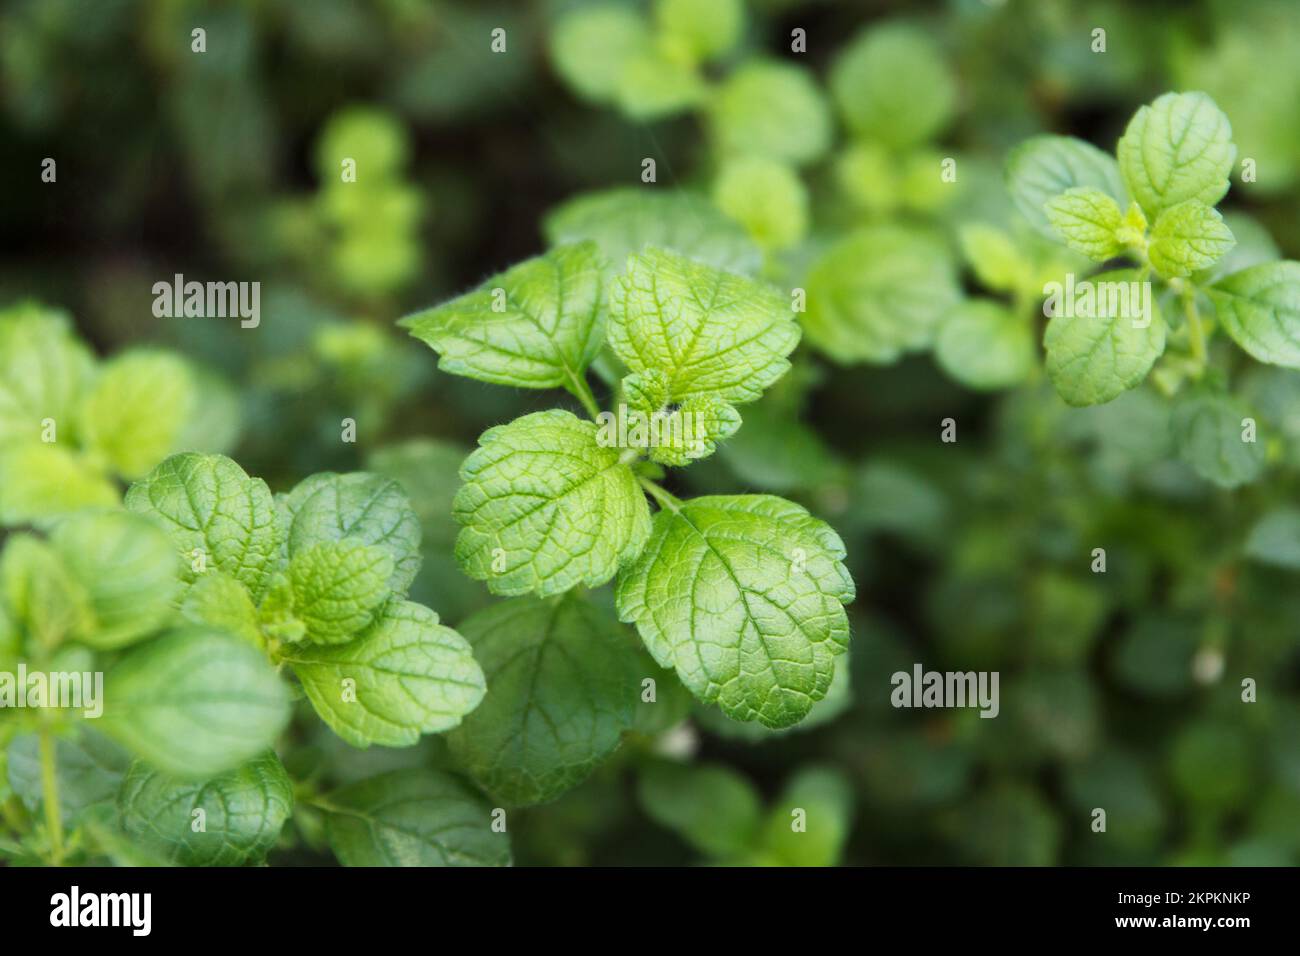 Medicinal balm, lemon mint is a medicinal, soothing plant that grows in a home garden Stock Photo